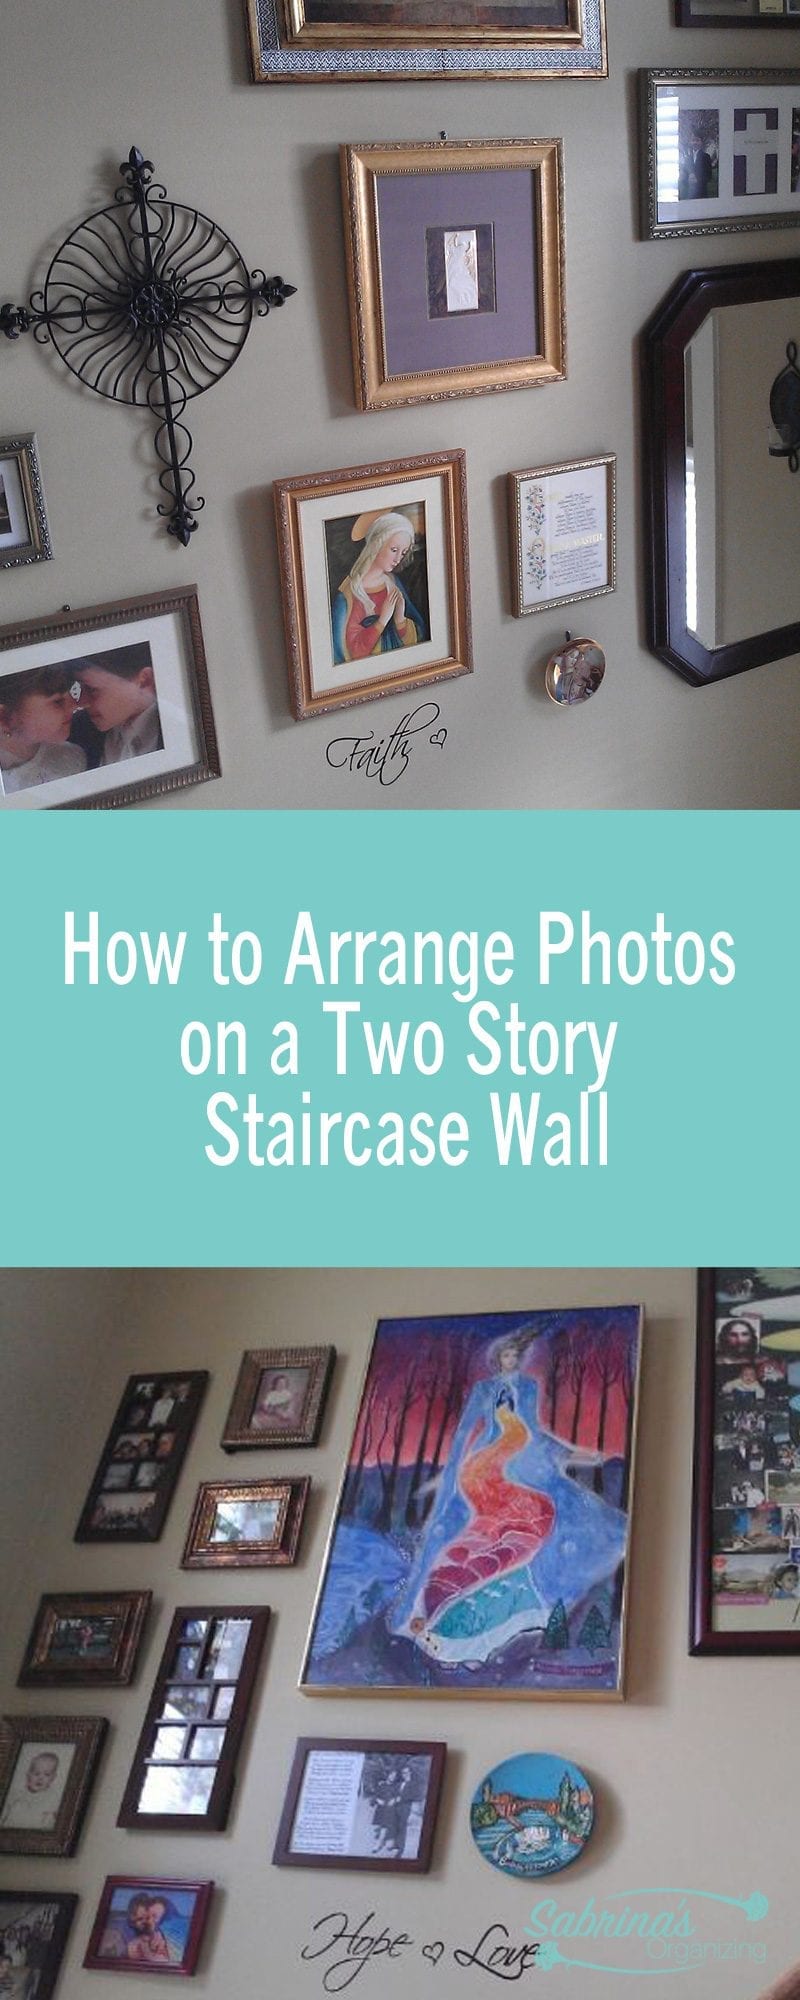 How to Arrange Photos on a Two Story Staircase Wall